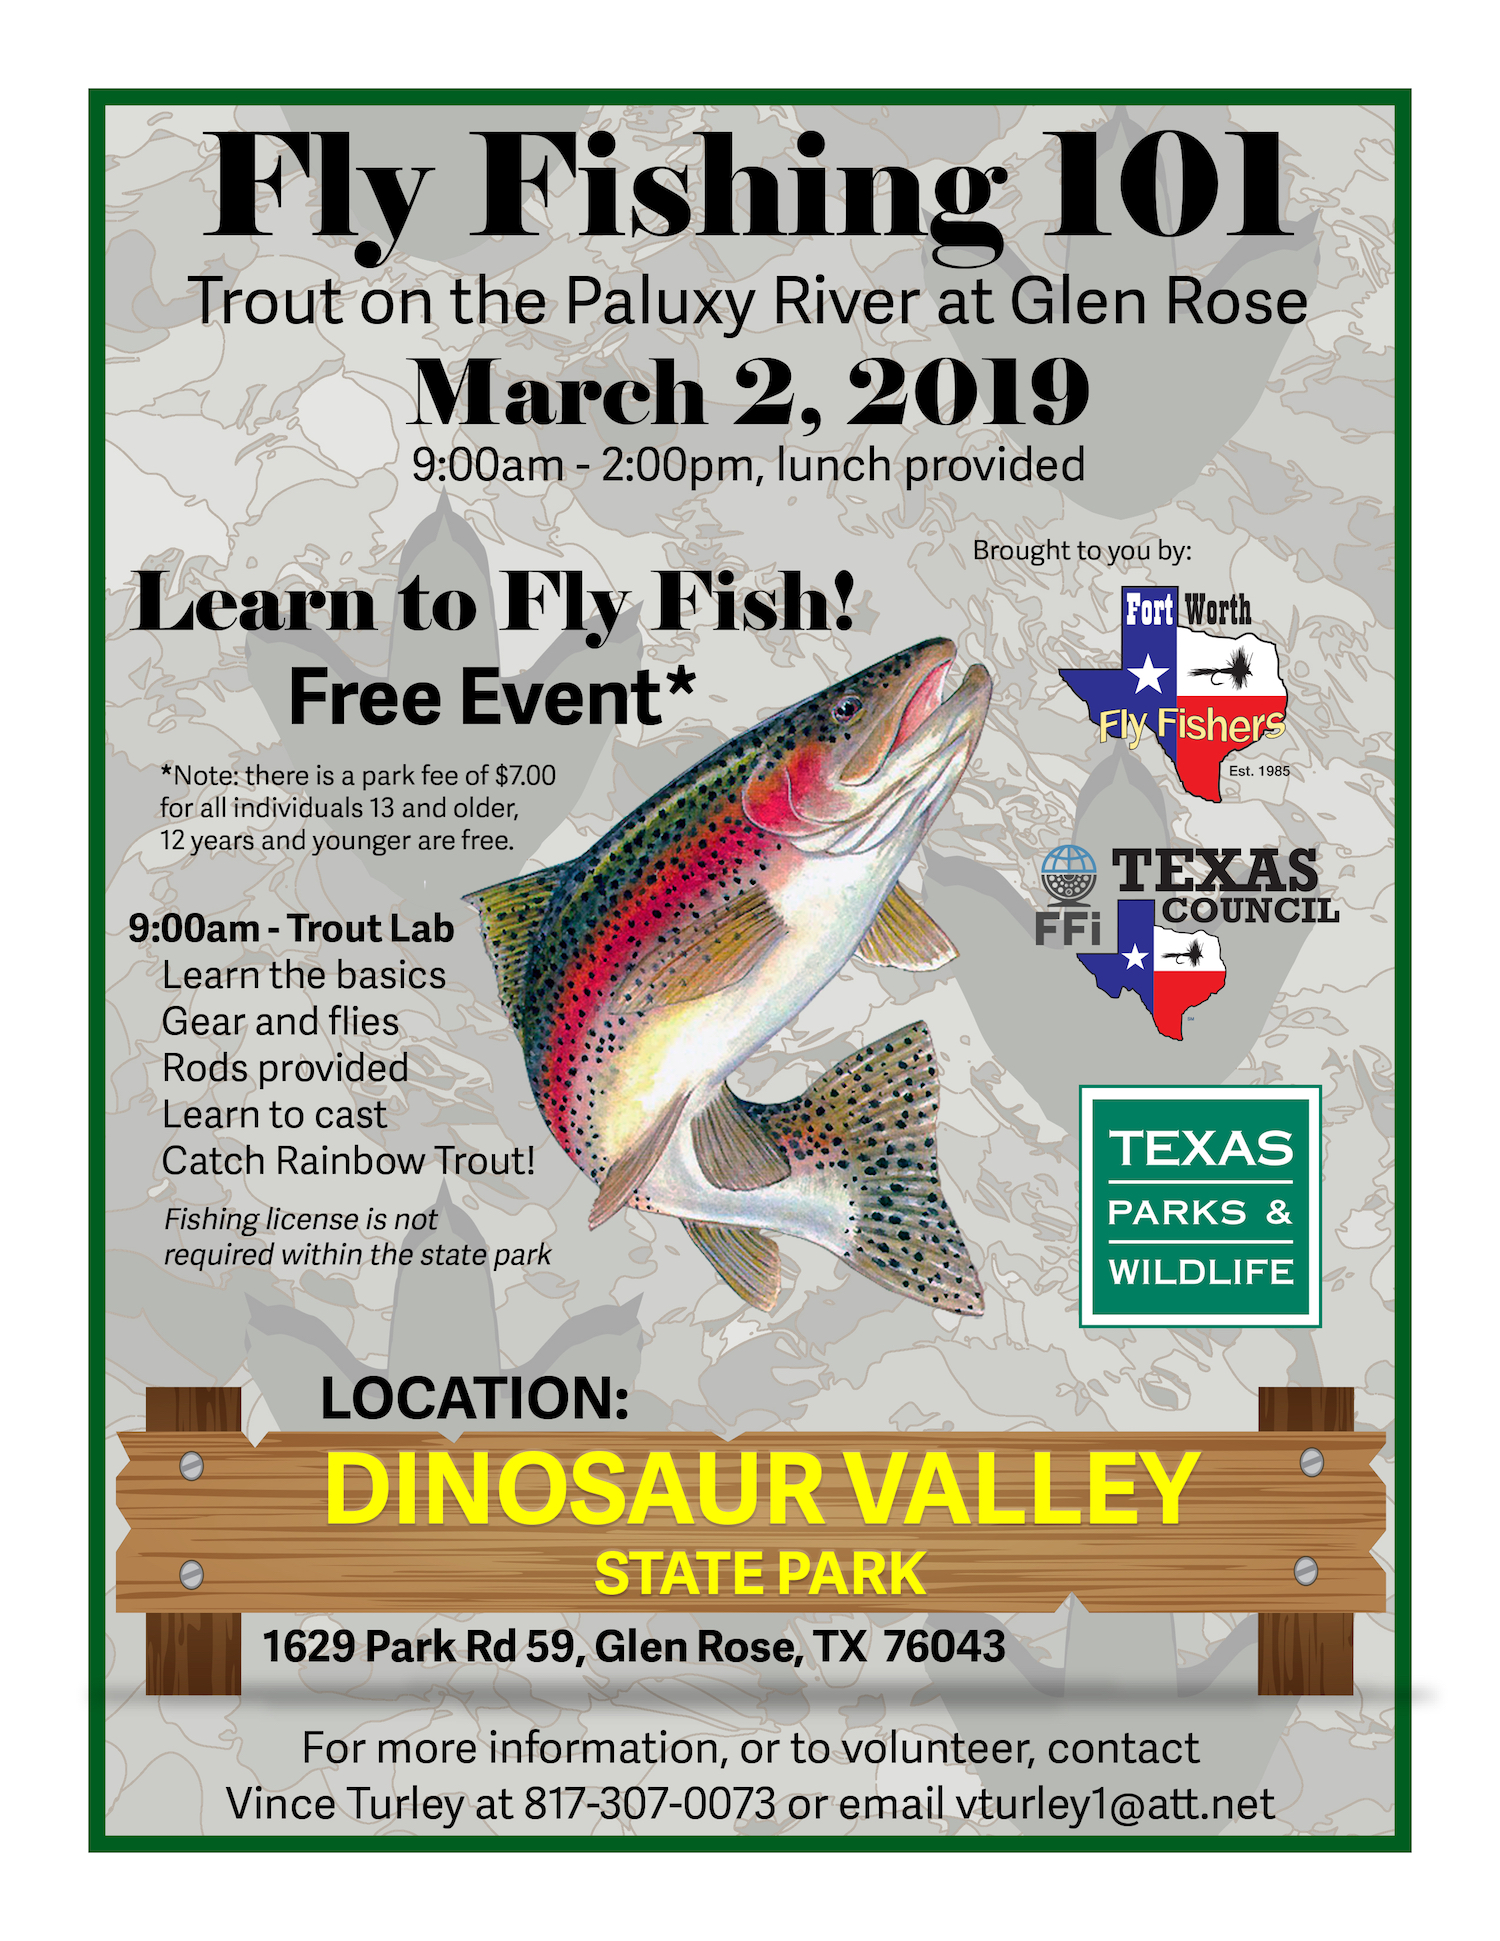 Join us for a special Fly Fish 101 on the Paluxy River on March 2